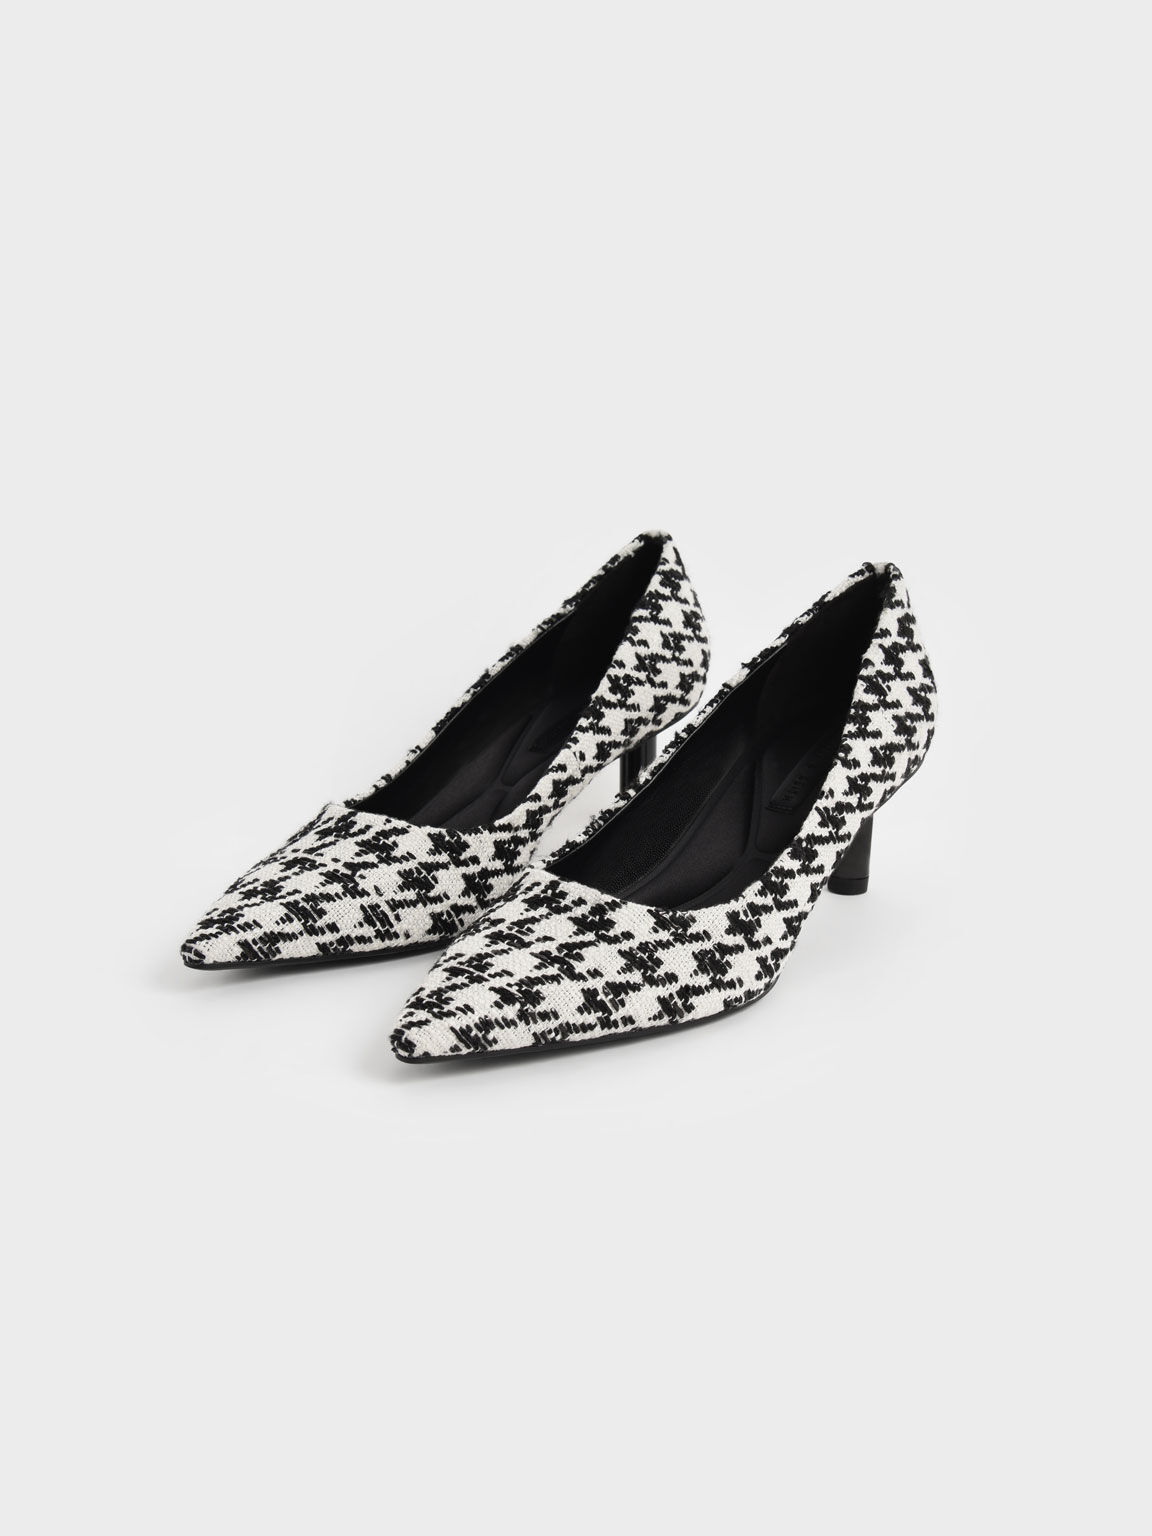 Multicoloured Houndstooth Print Cylindrical Kitten Heel Pumps - CHARLES ...